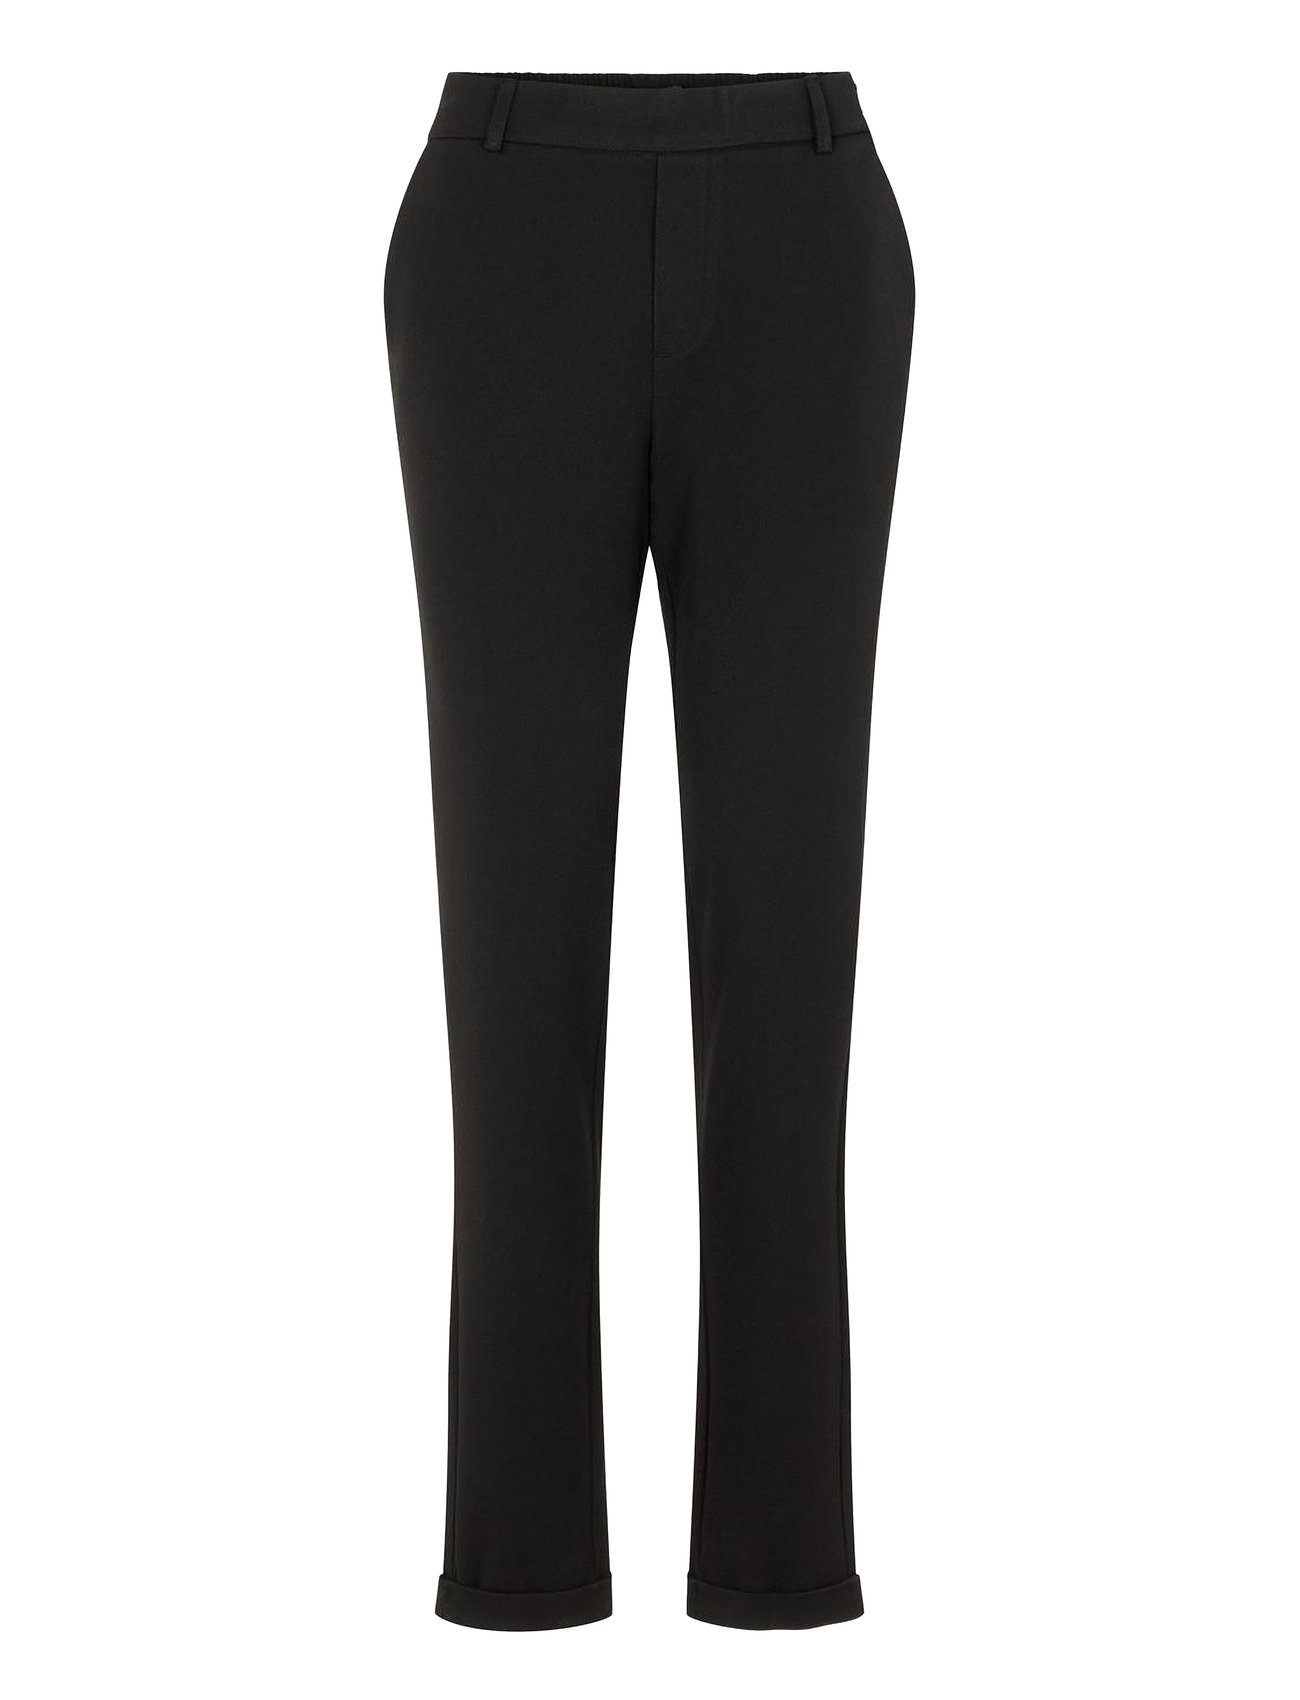 Buy VERO MODA Solid Cotton Relaxed Fit Womens Casual Trousers  Shoppers  Stop